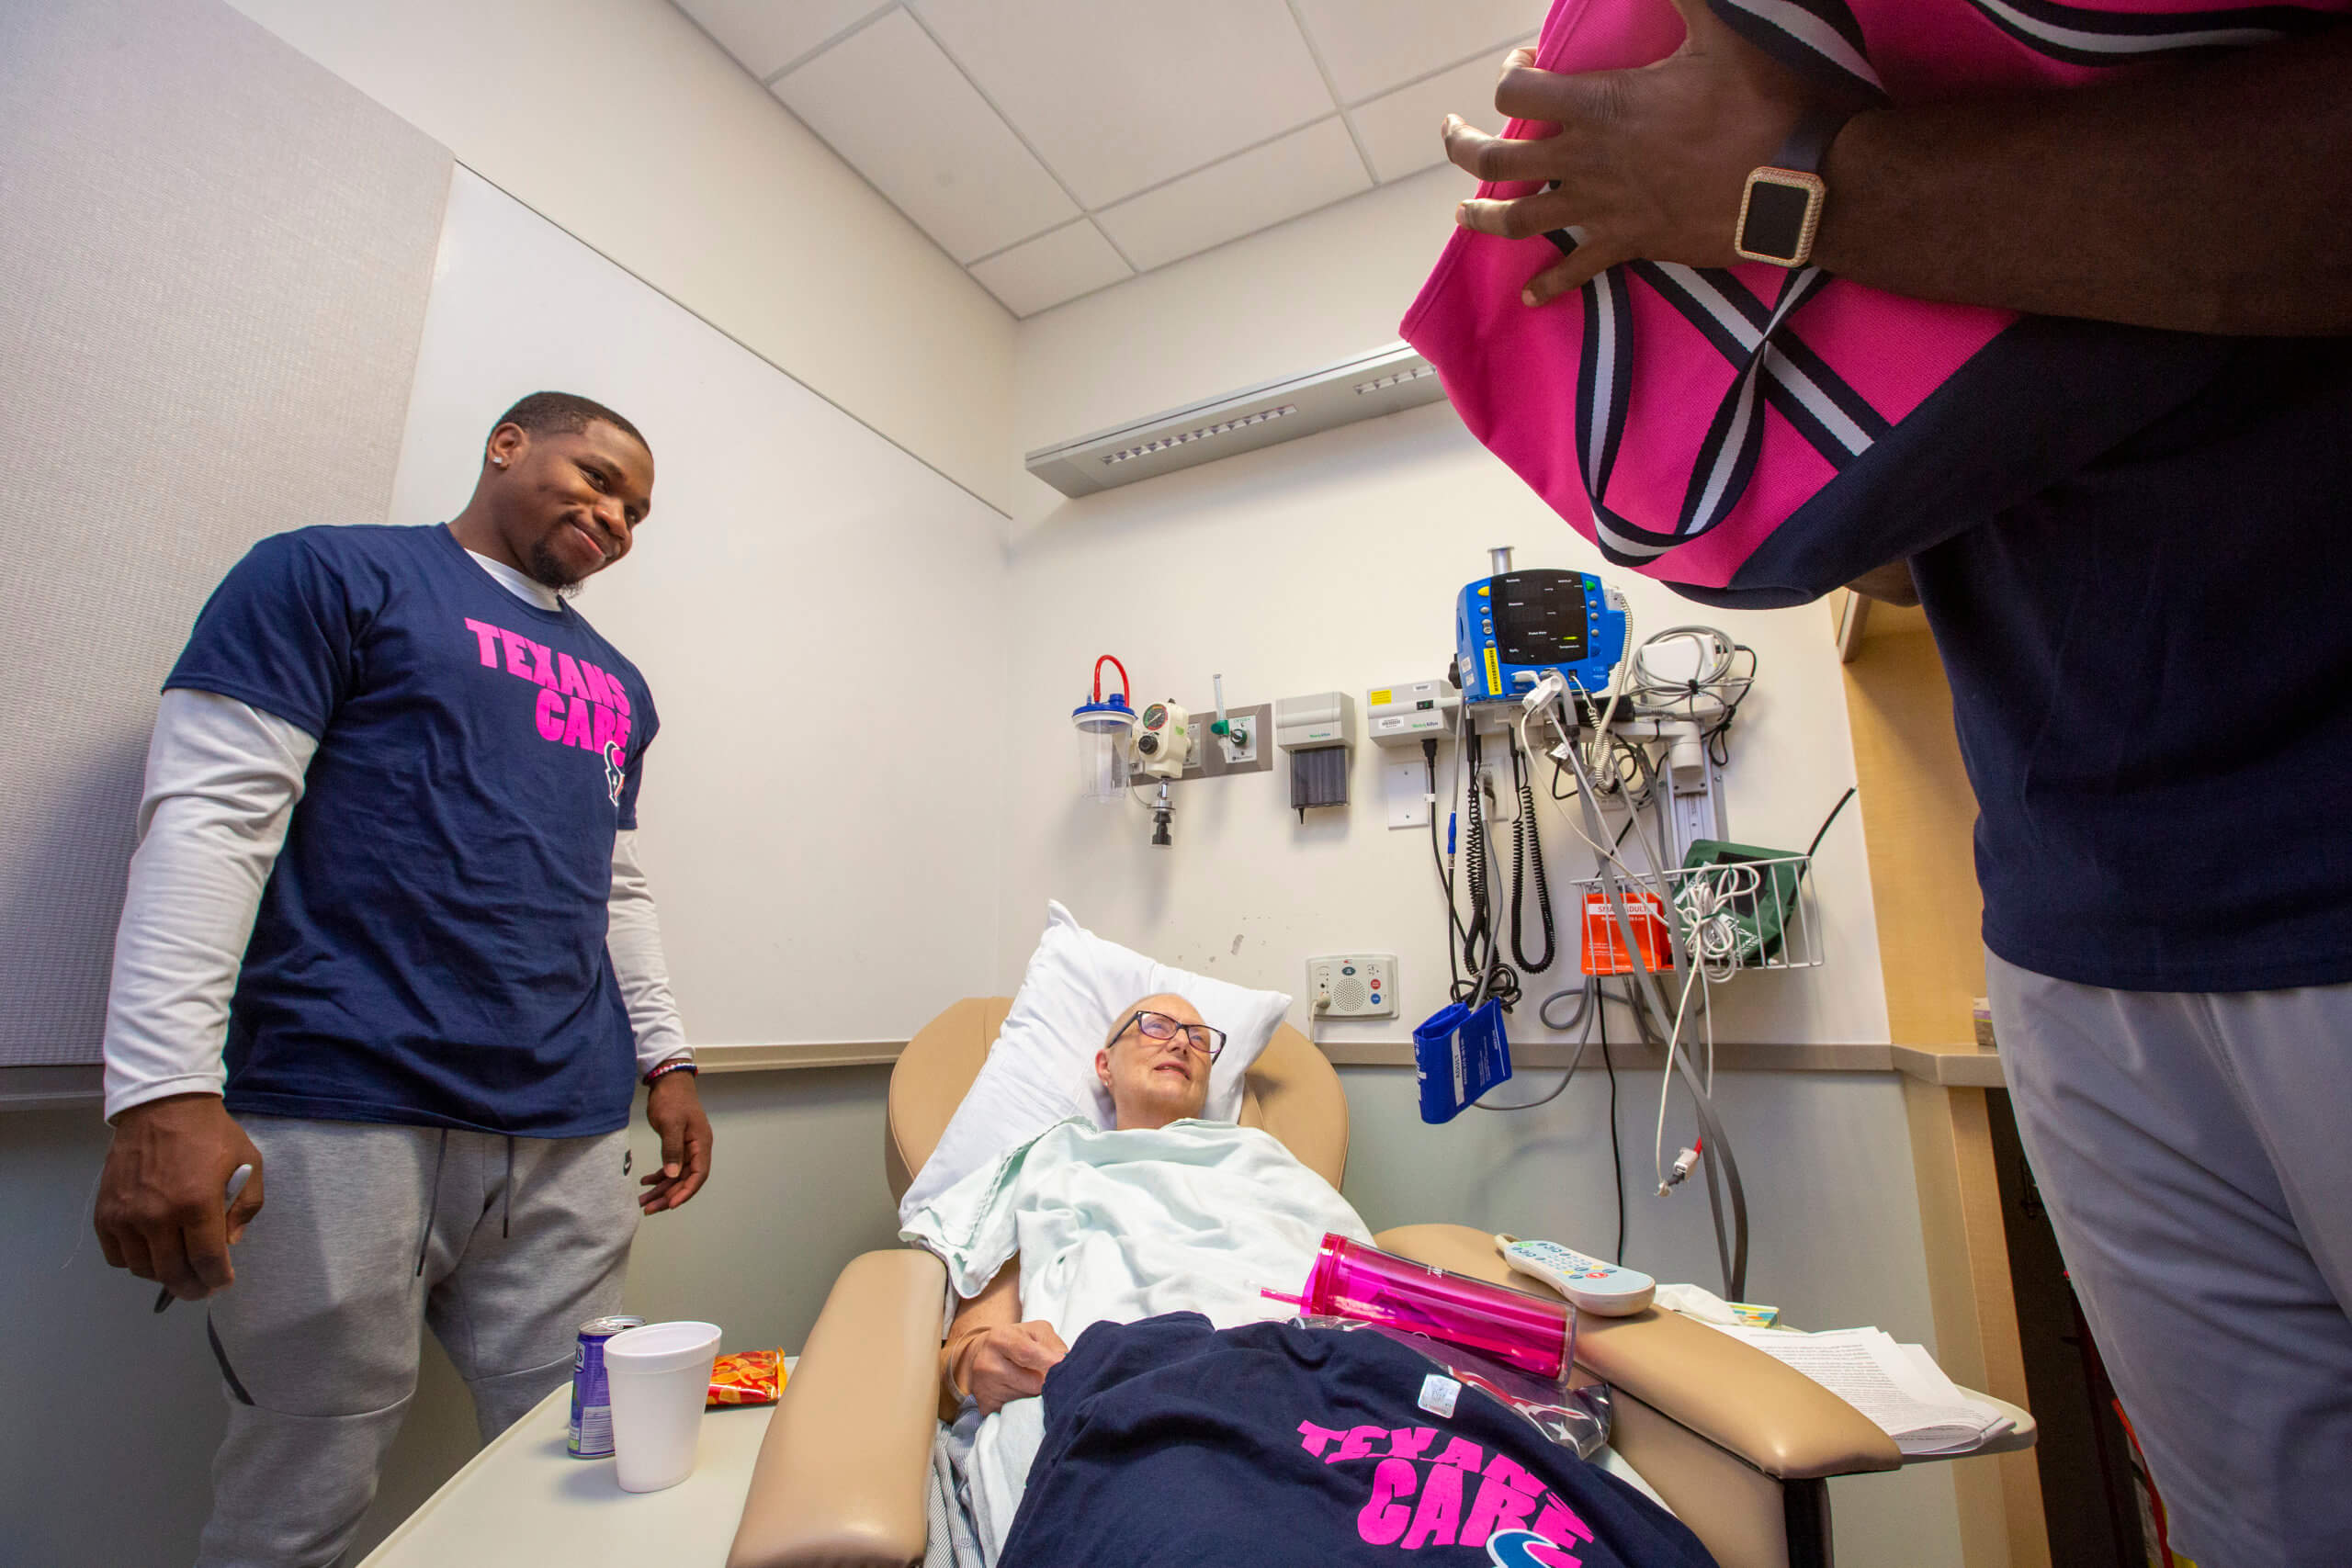 Houston Texans players DeAndre Carter and Roderick Johnson brightened the day for breast cancer patients who were receiving treatments at three Houston Methodist Hospital locations.